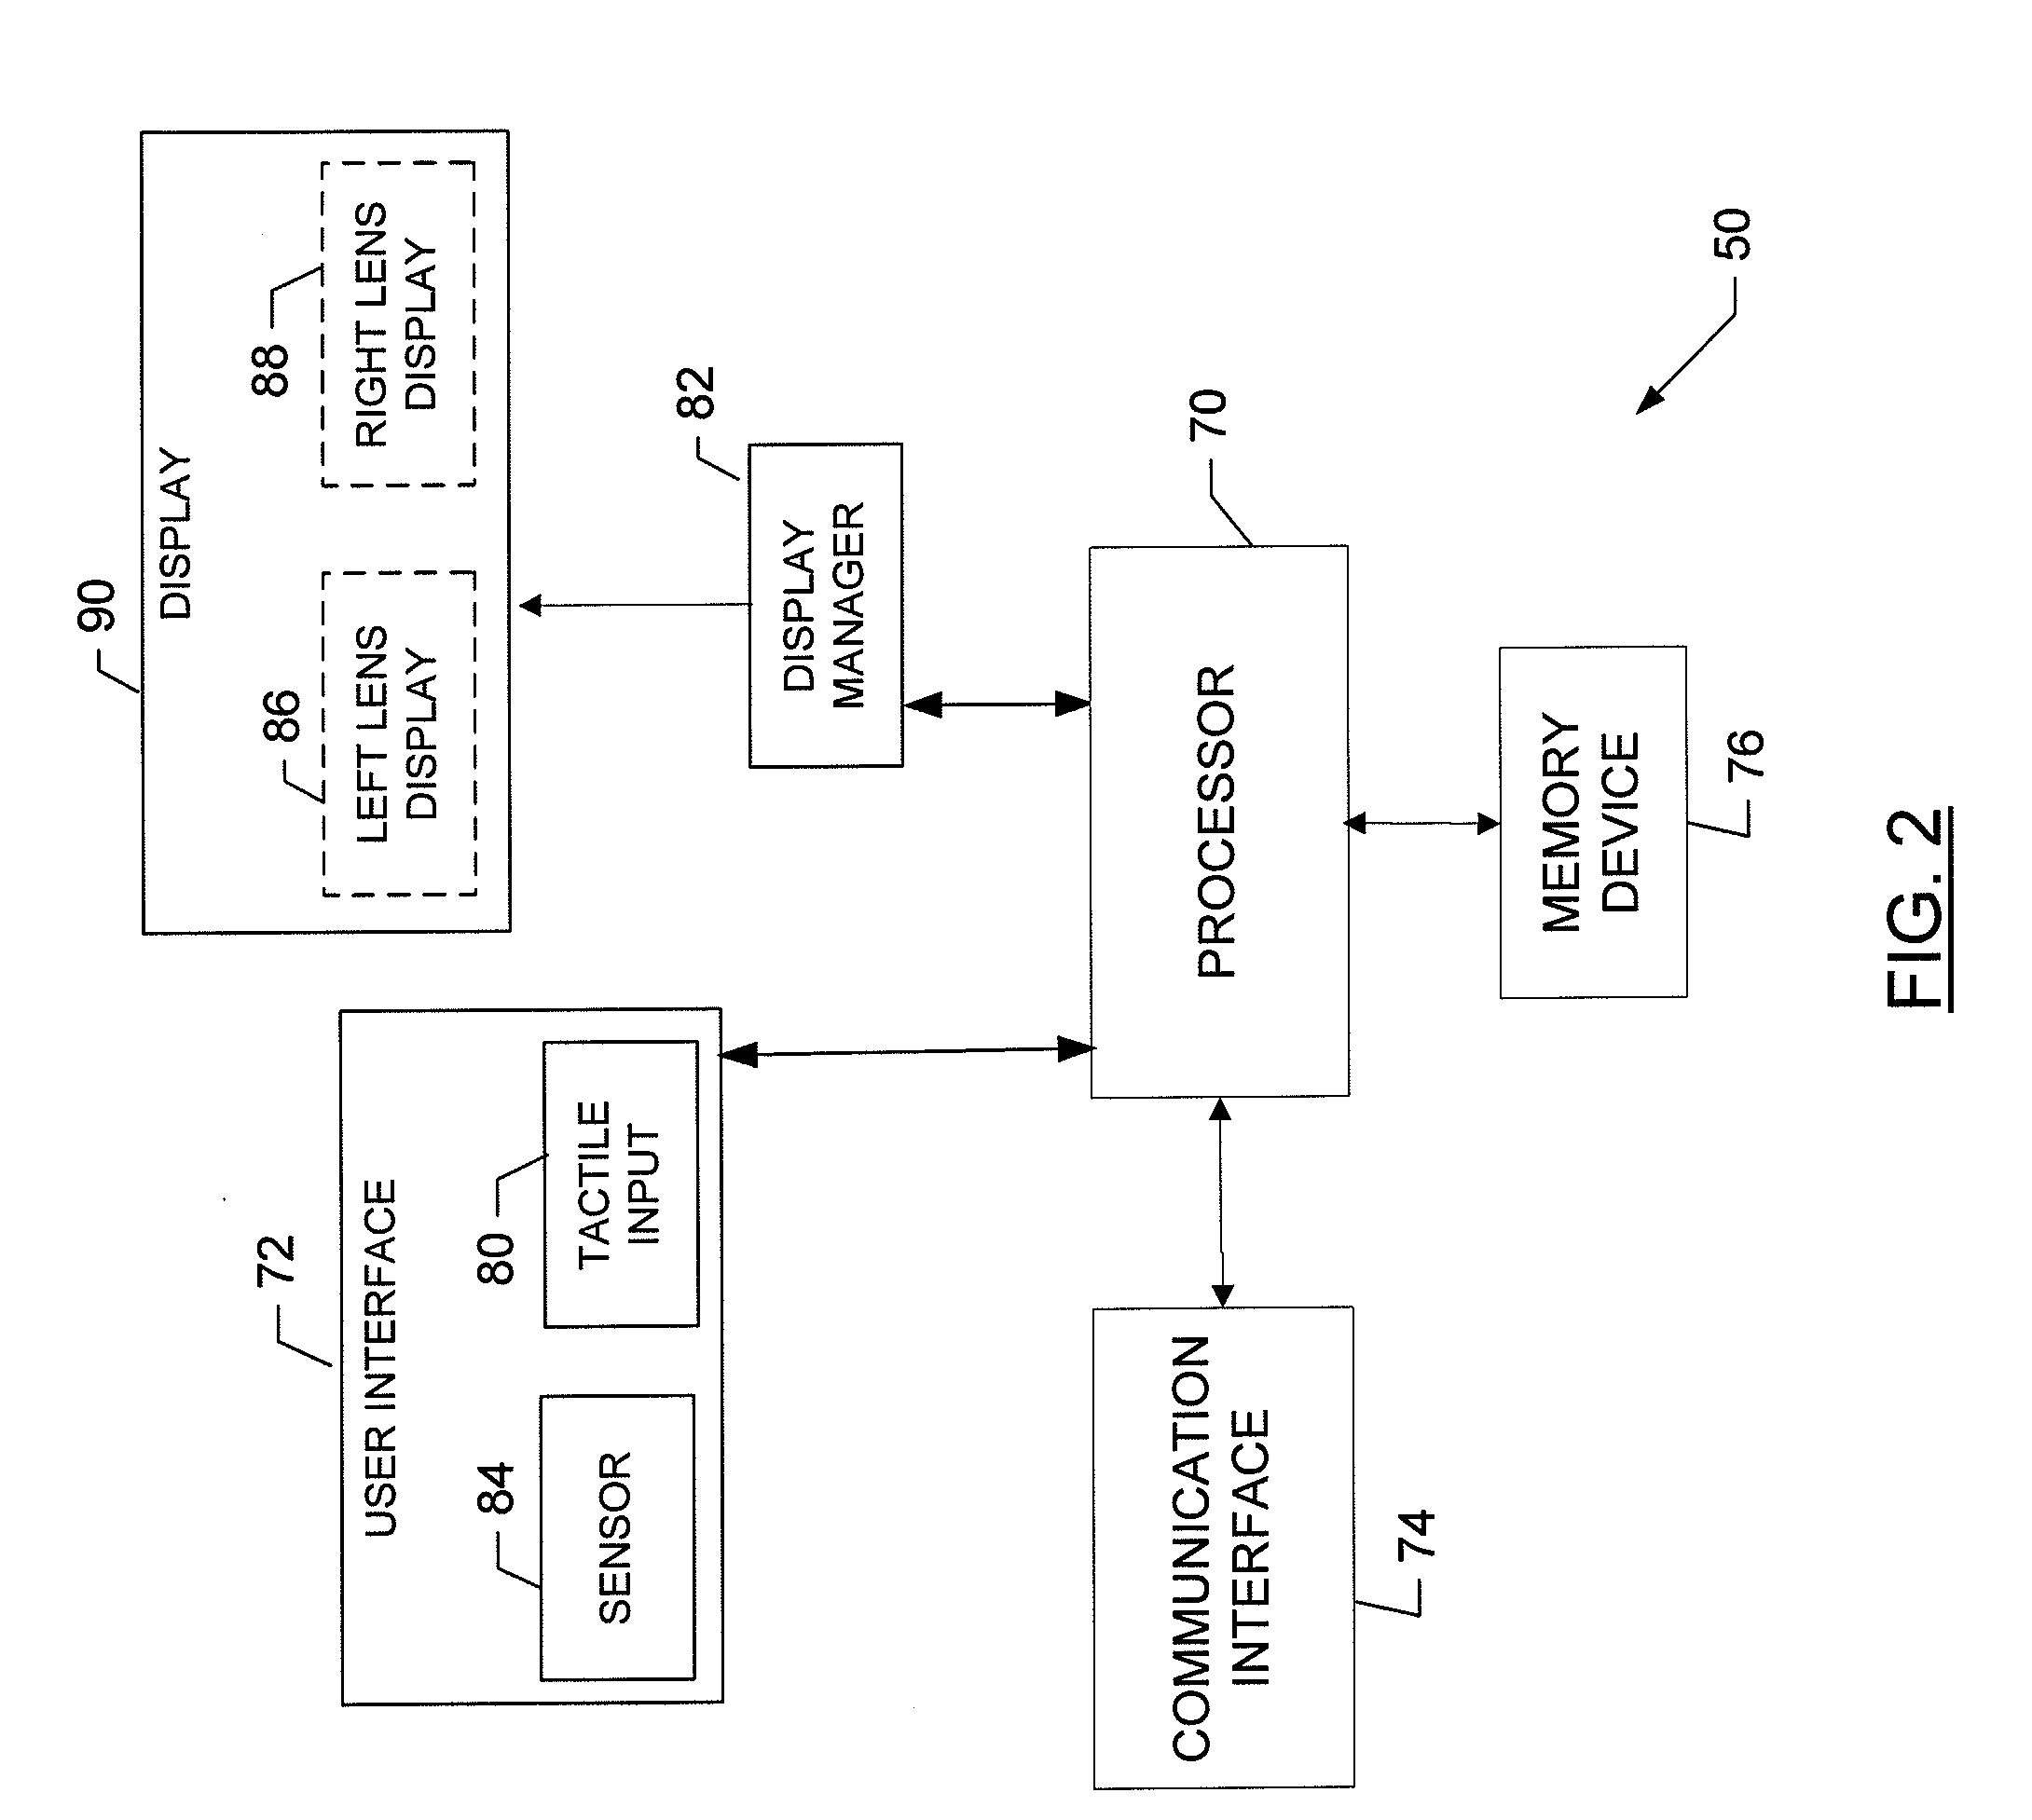 Method and apparatus for providing input through an apparatus configured to provide for display of an image